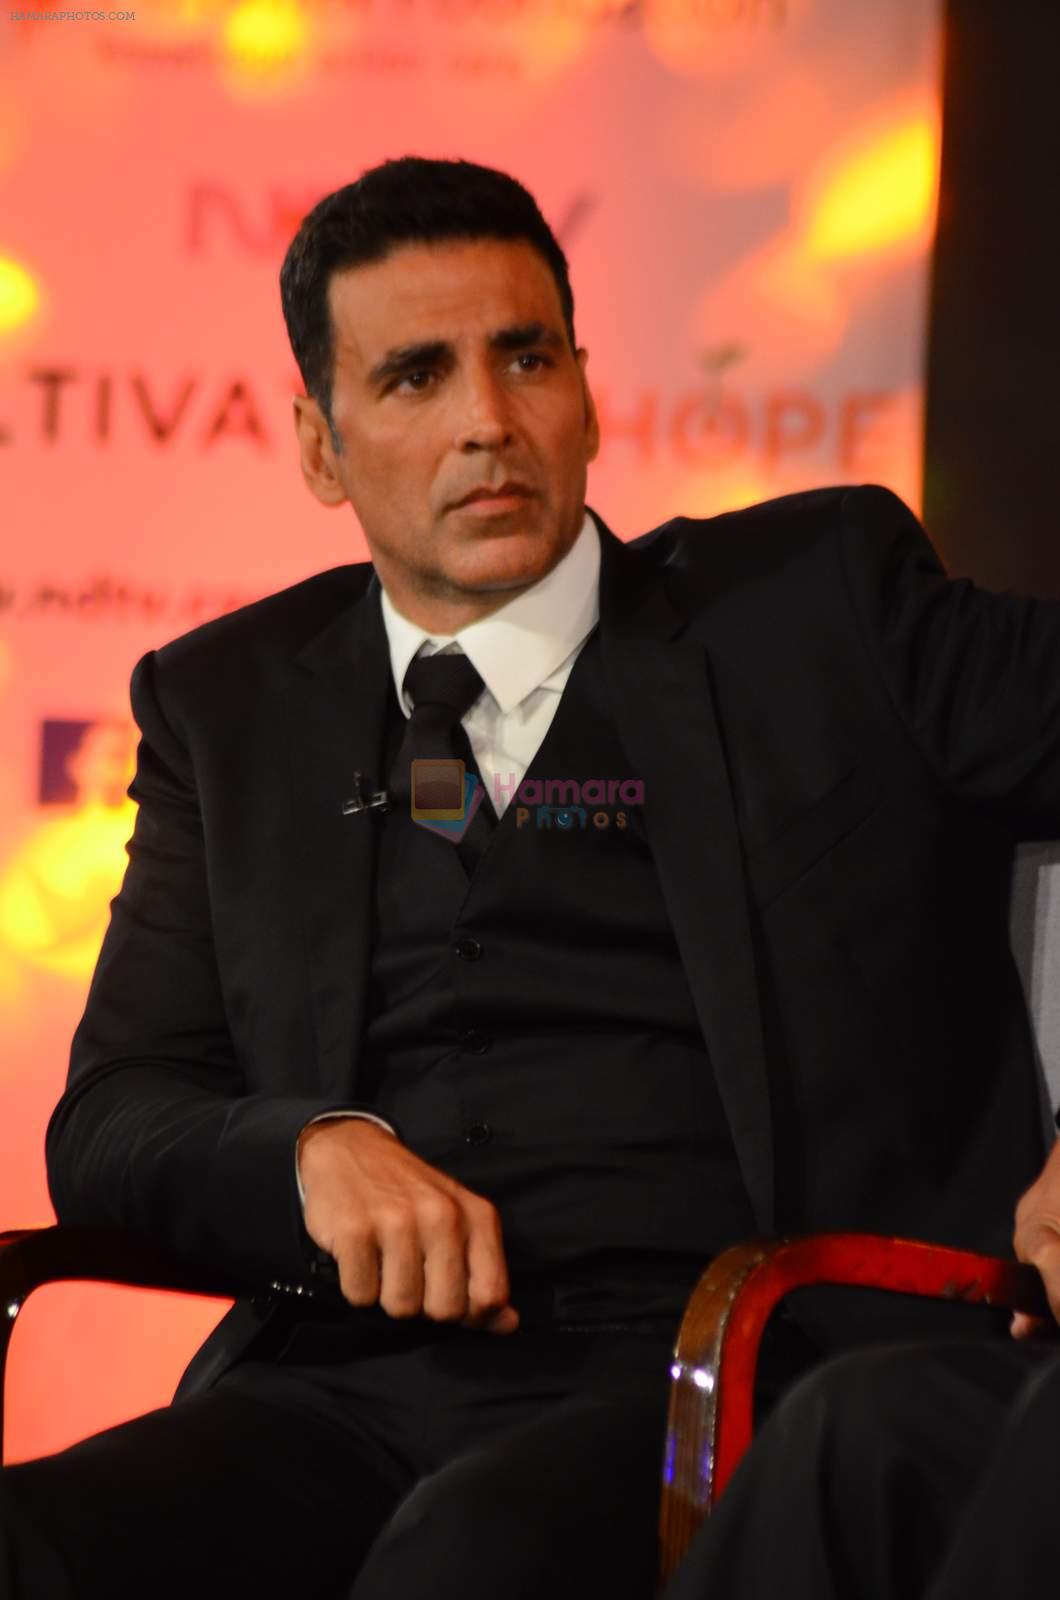 Akshay Kumar at NDTV Initiative for farmers suffering on 15th Dec 2015